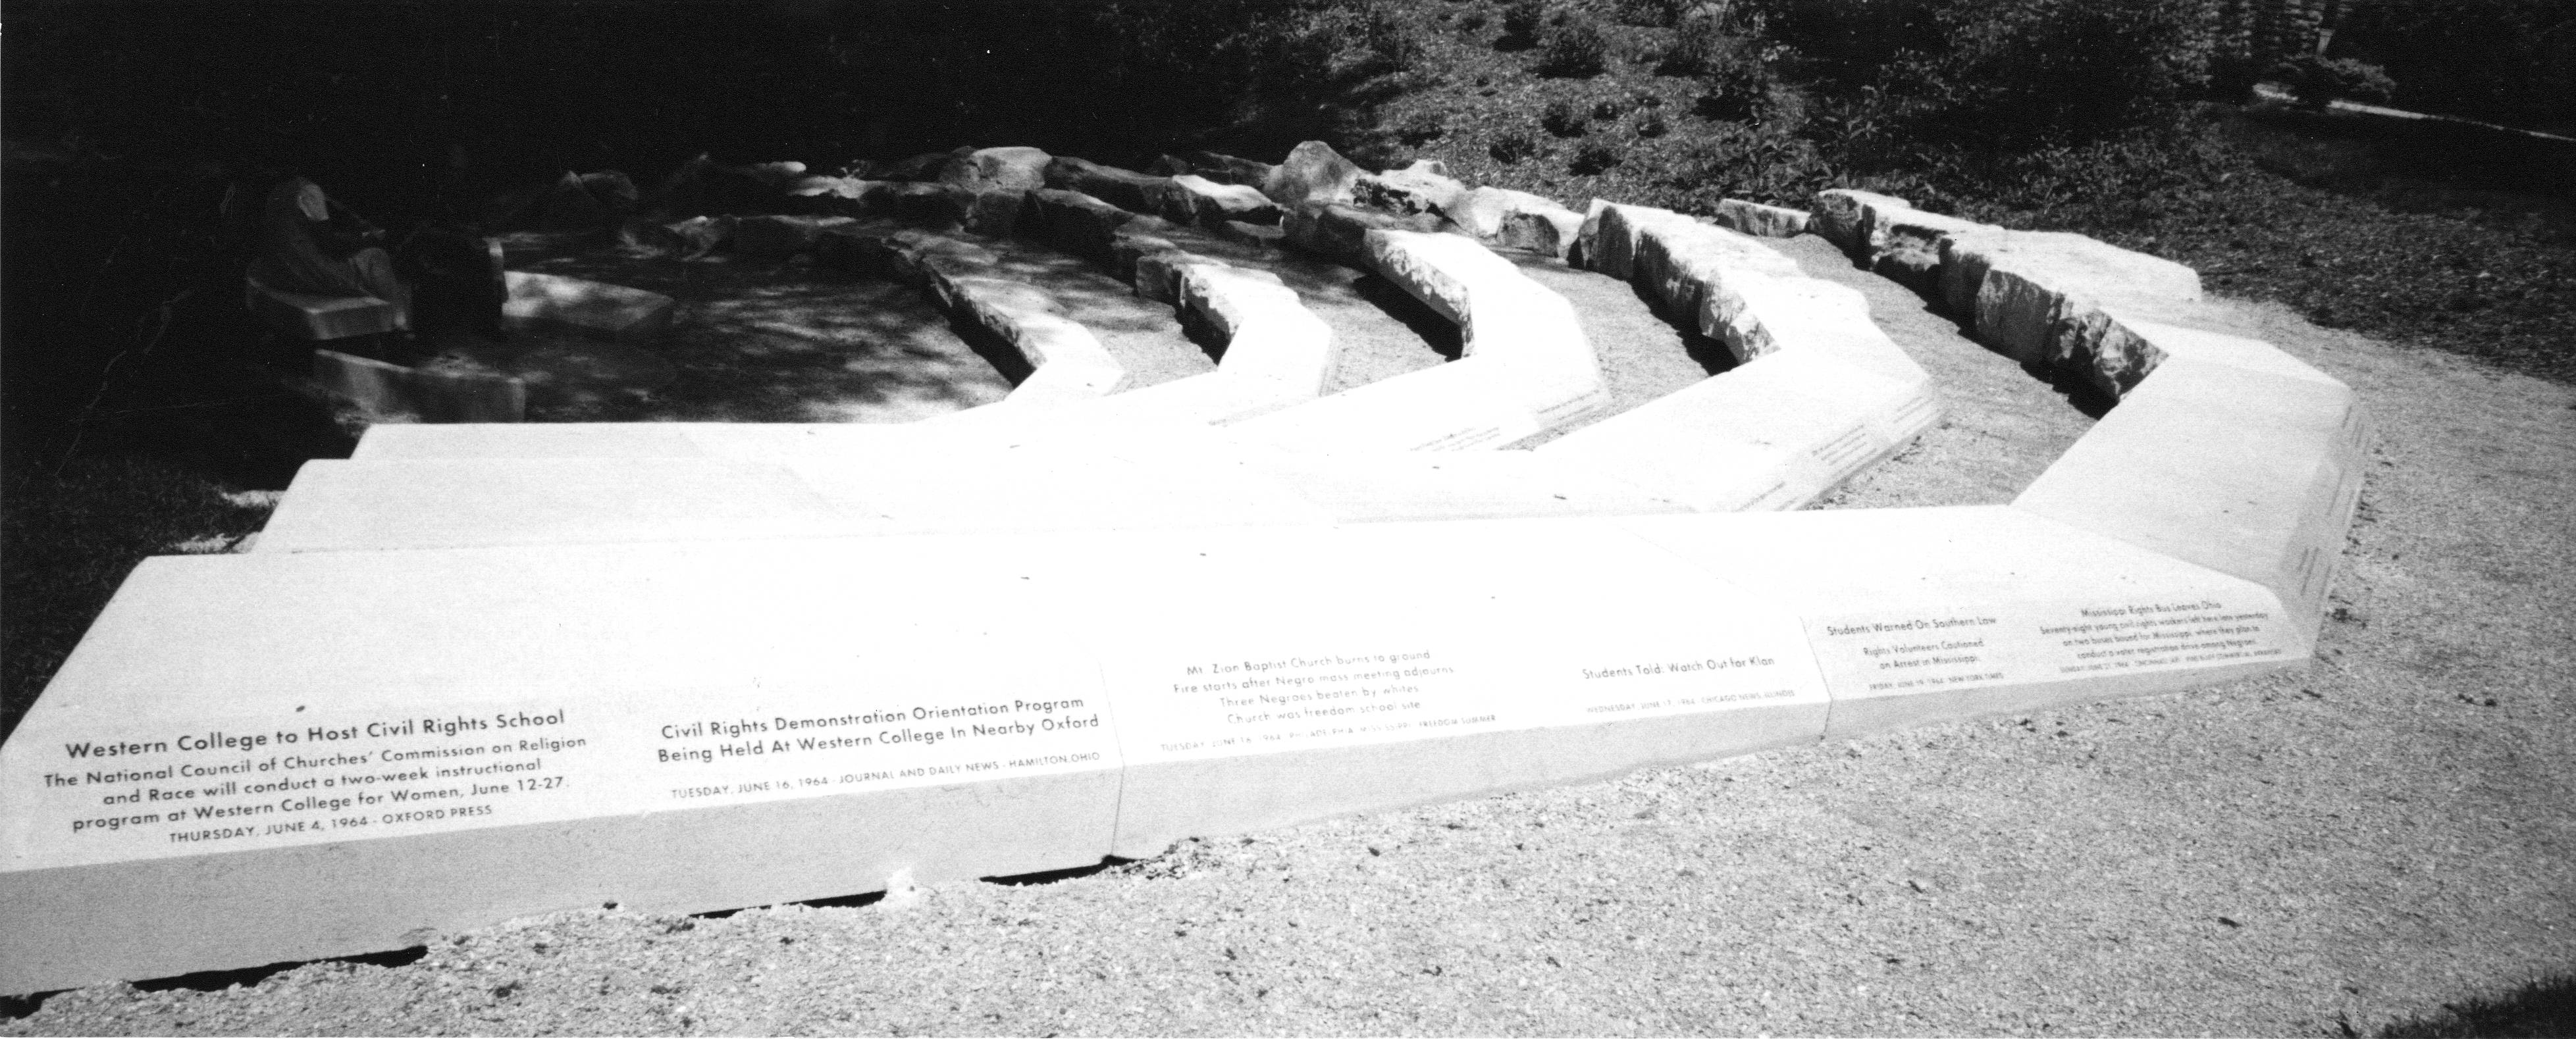 Engraved stones of the Freedom Summer Memorial